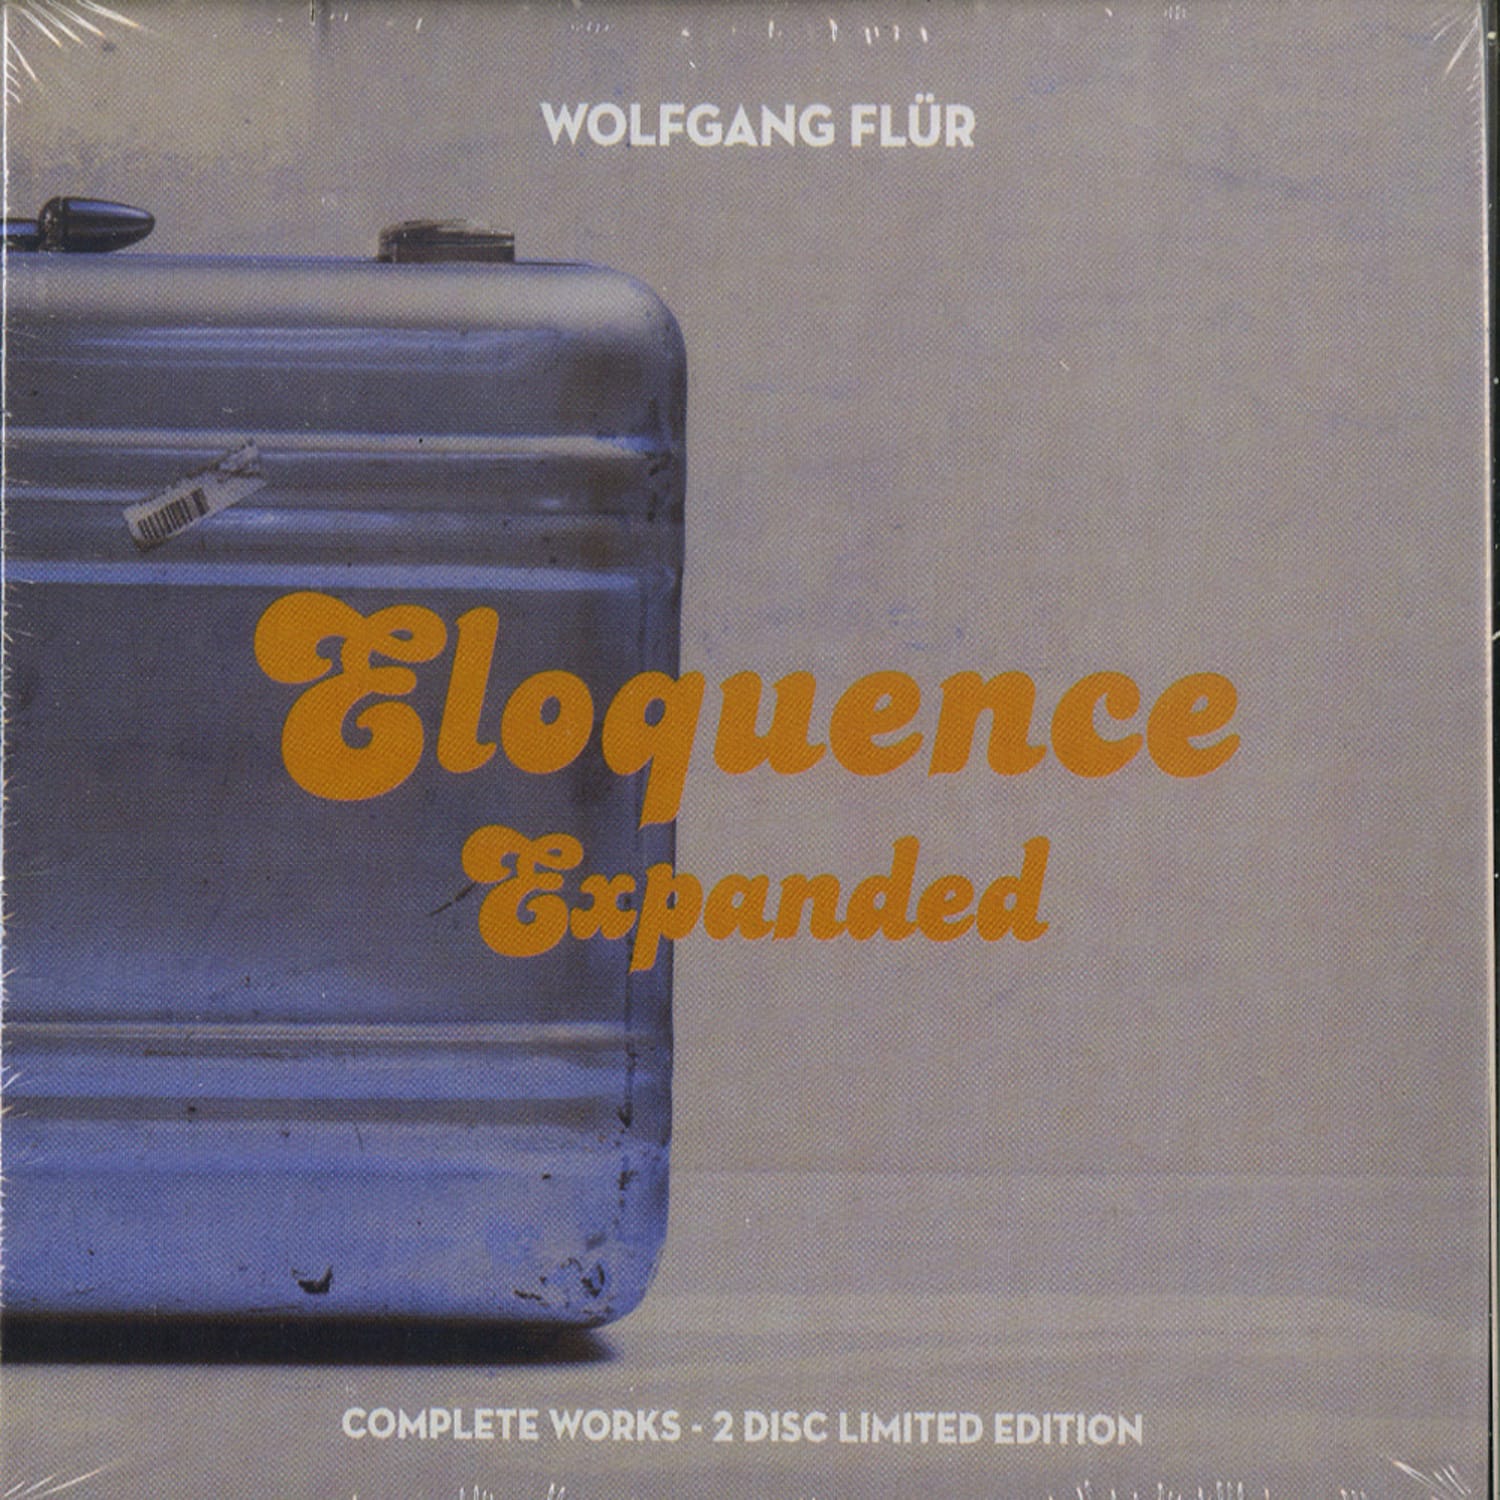 Wolfgang Fluer - ELOQUENCE EXPANDED - THE COMPLETE WORKS 